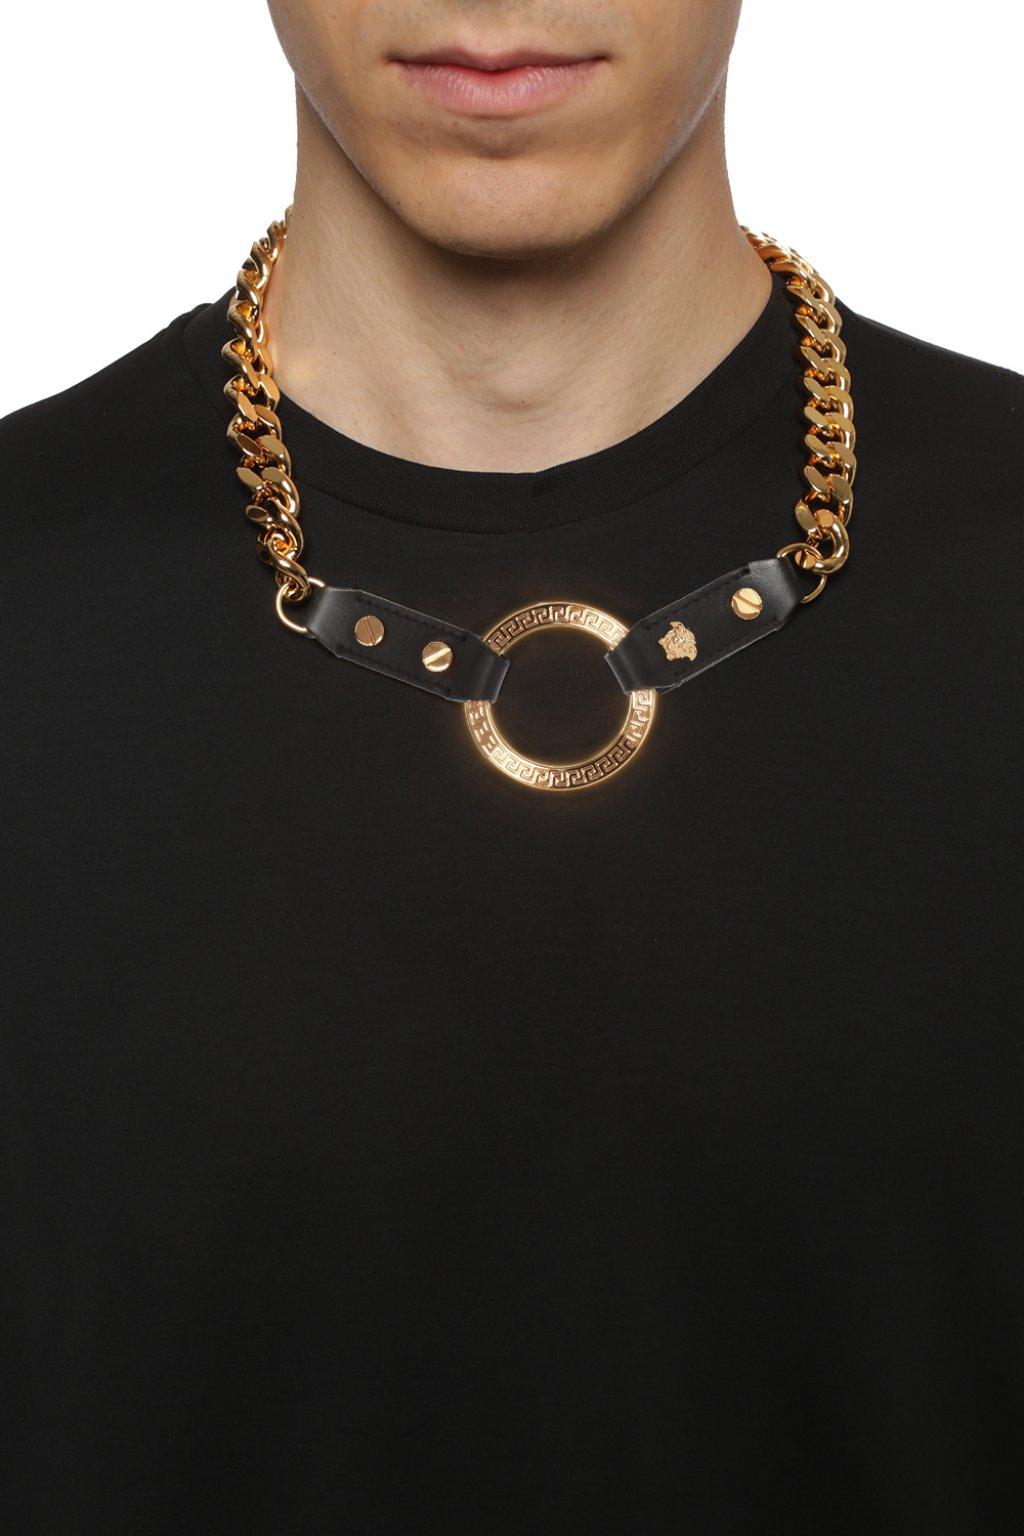 Versace Leather Medusa Head Necklace in Gold (Metallic) for Men - Lyst